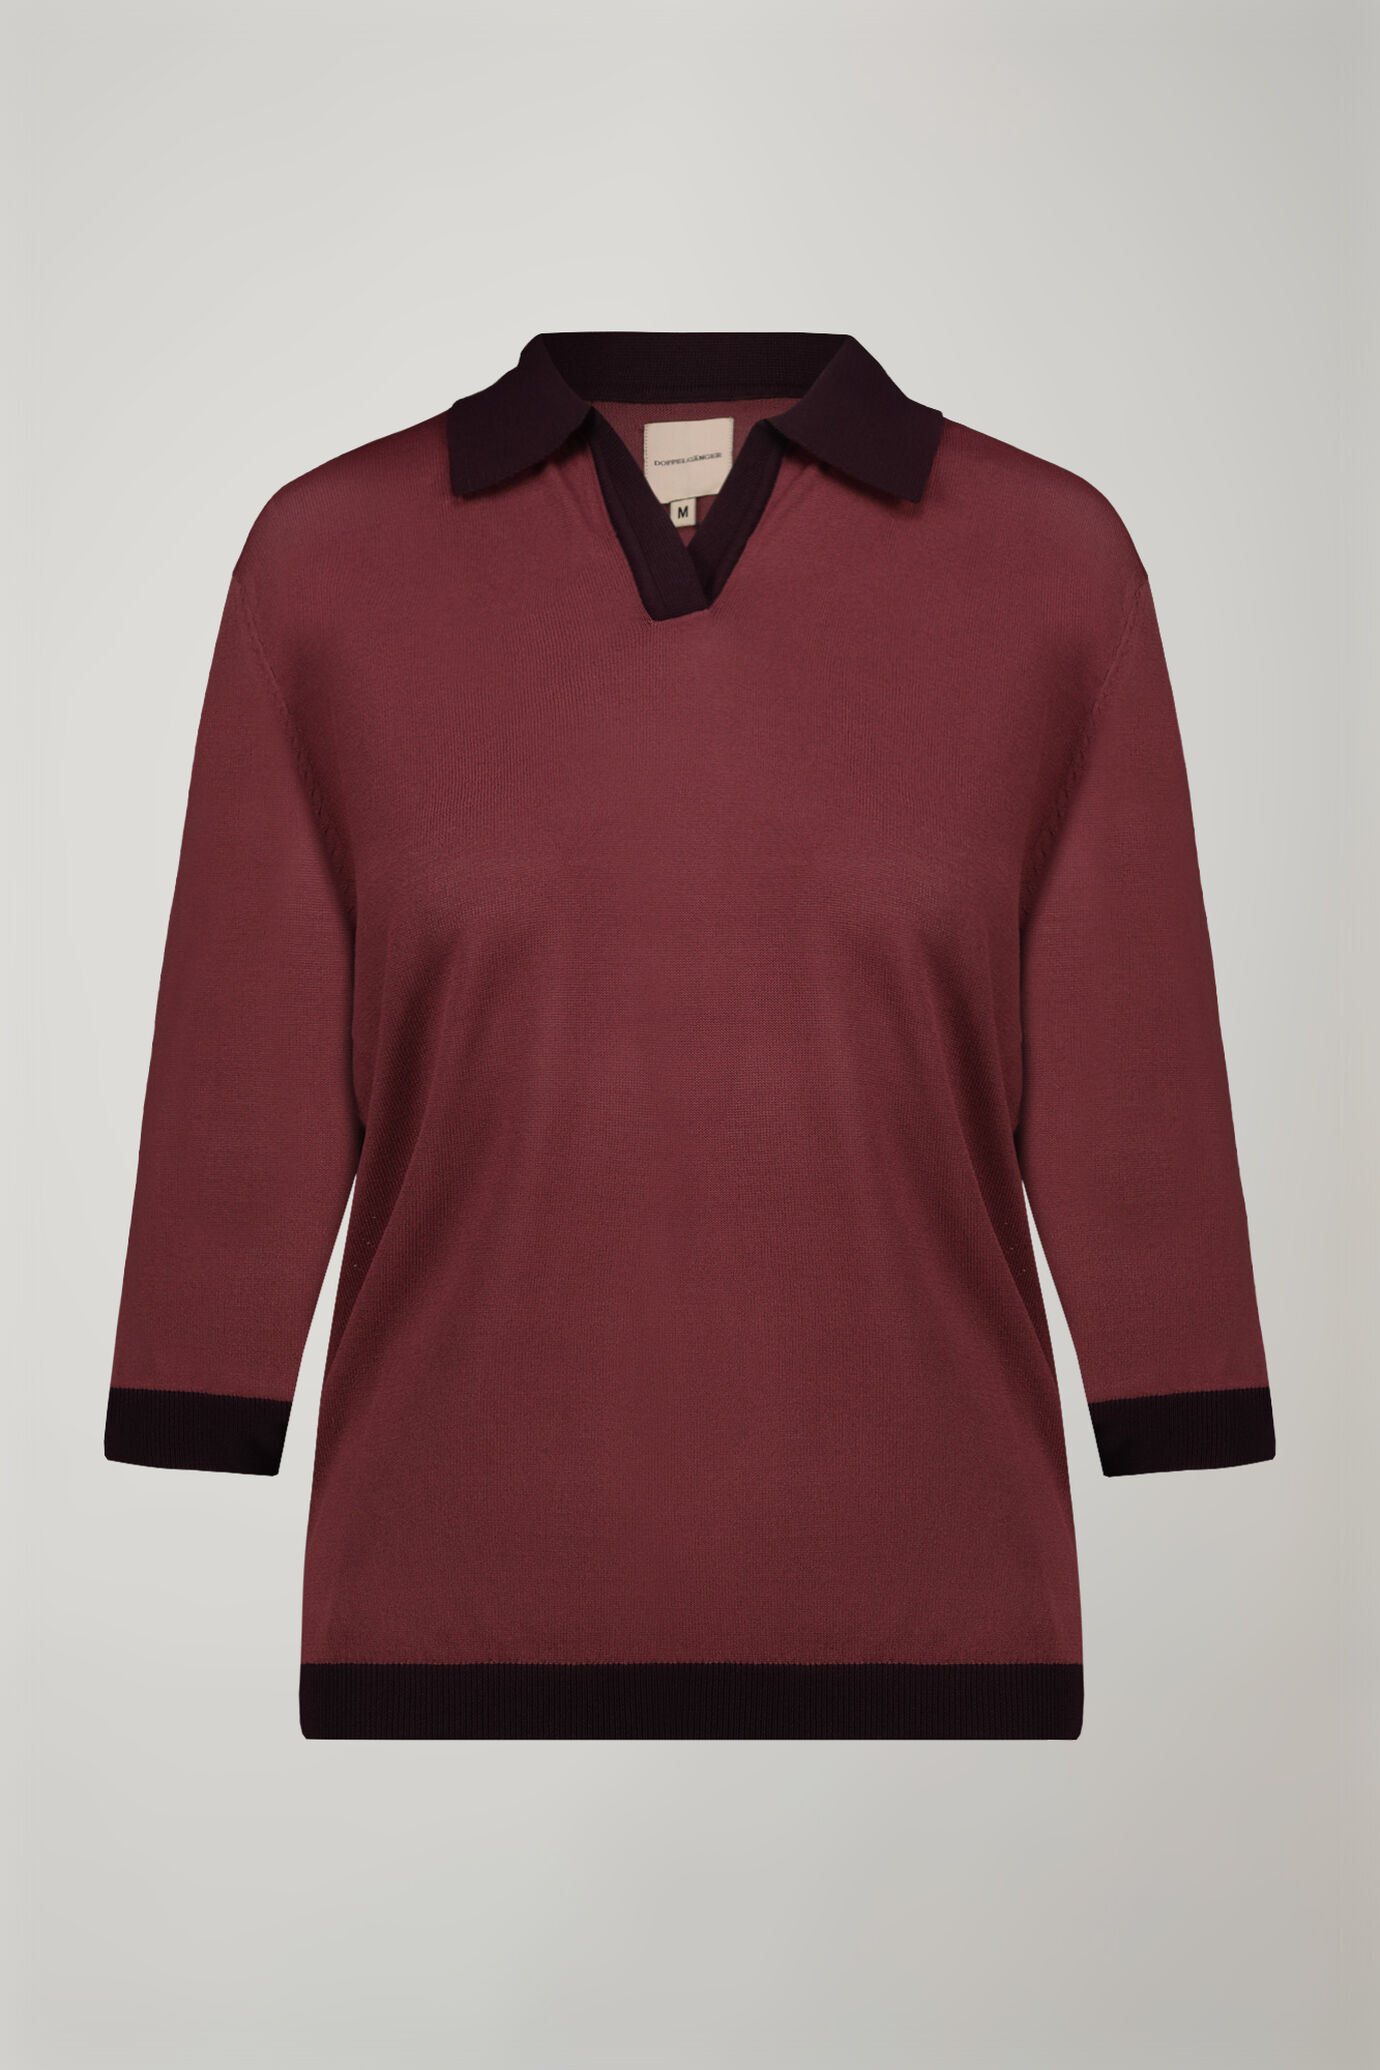 Women’s polo with three-quarter sleeve regular fit image number 4